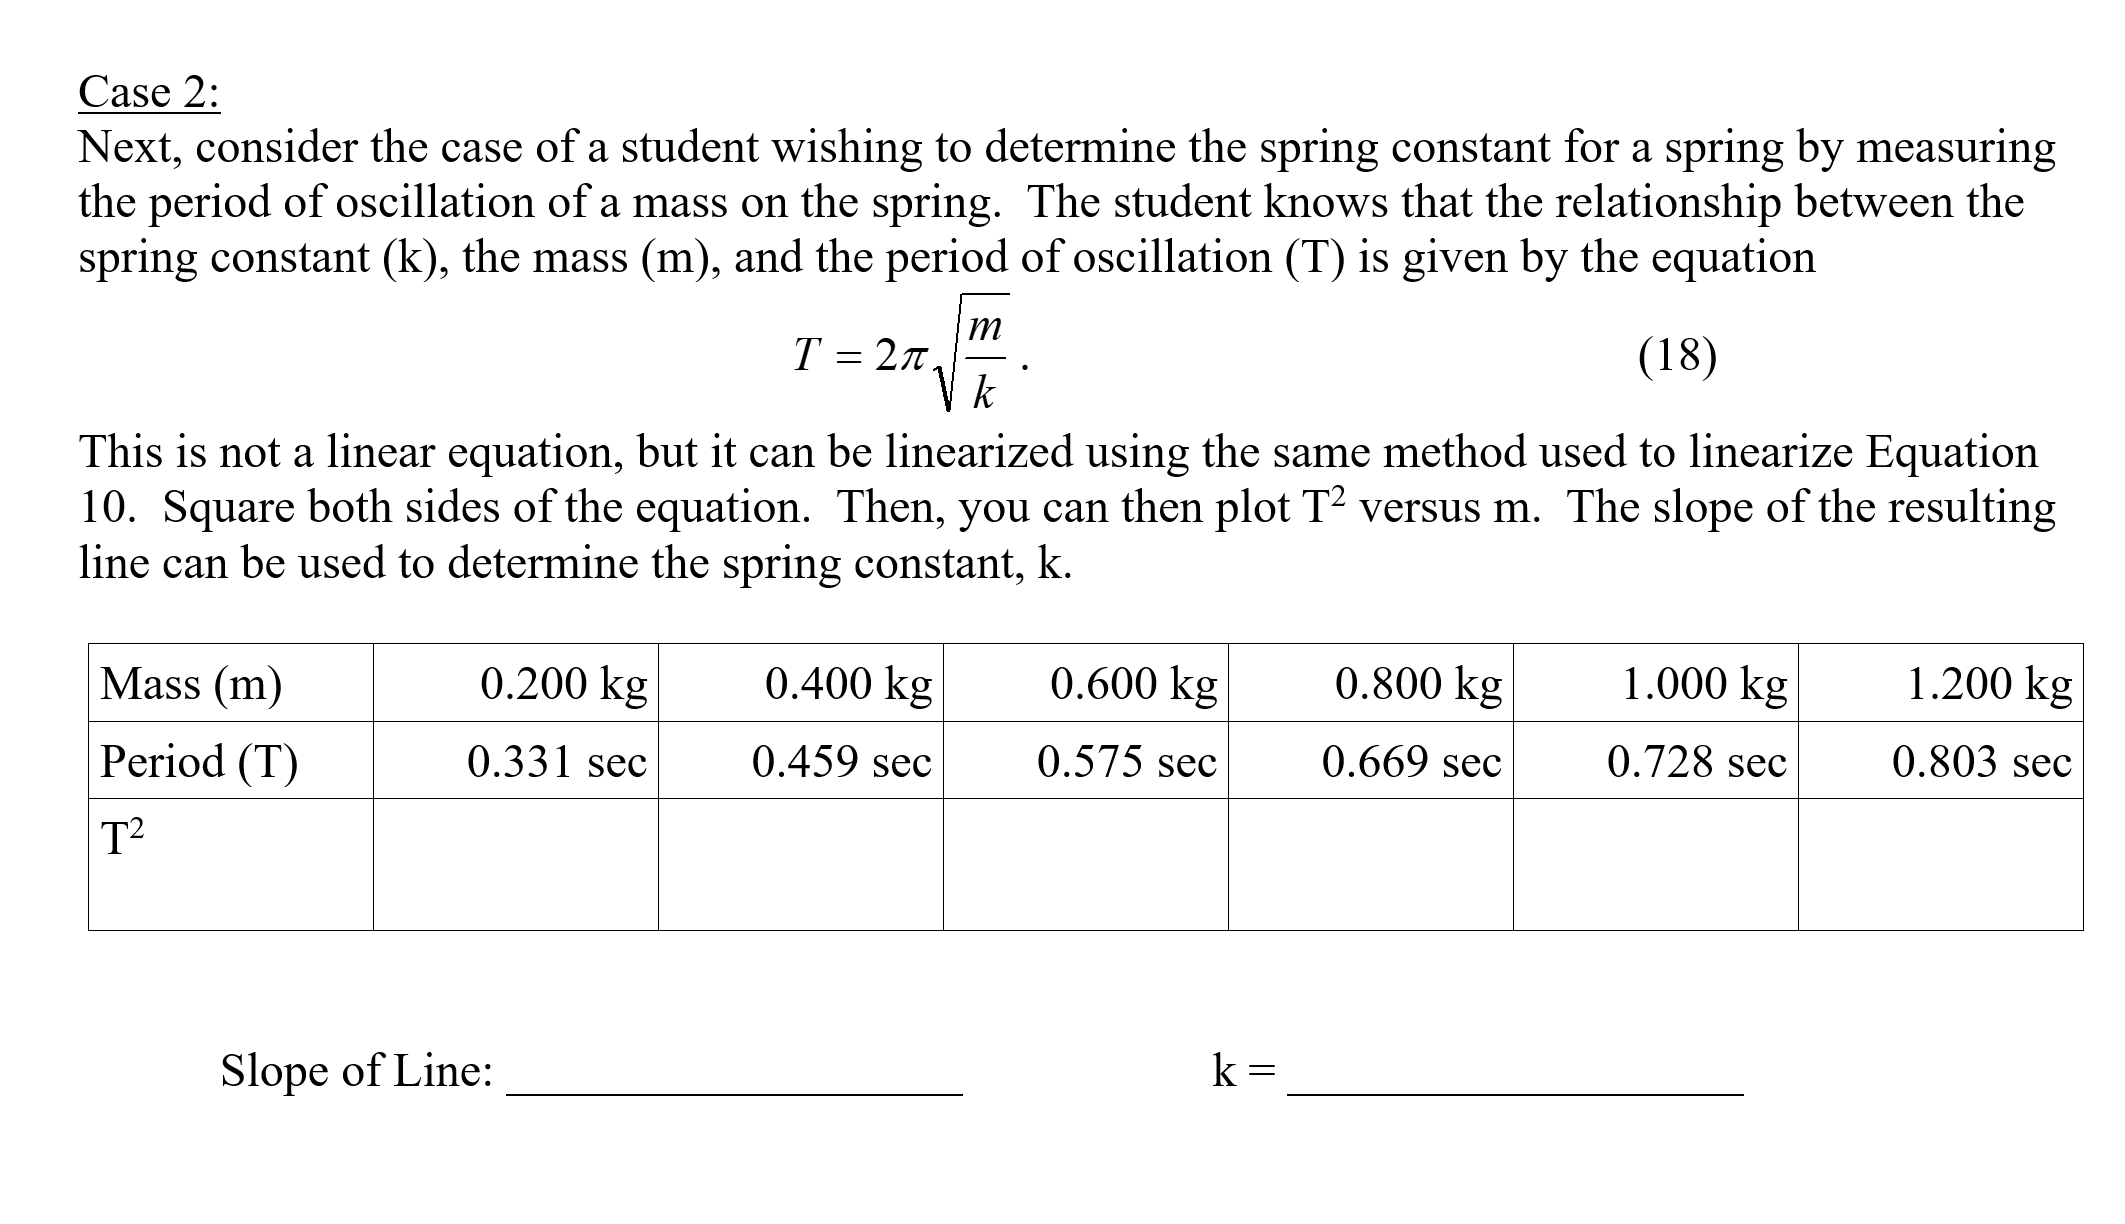 Case 2:
Next, consider the case of a student wishing to determine the spring constant for a spring by measuring
the period of oscillation of a mass on the spring. The student knows that the relationship between the
spring constant (k), the mass (m), and the period of oscillation (T) is given by the equation
m
T = 2n.
(18)
V k
This is not a linear equation, but it can be linearized using the same method used to linearize Equation
10. Square both sides of the equation. Then, you can then plot T² versus m. The slope of the resulting
line can be used to determine the spring constant, k.
Mass (m)
0.200 kg
0.400 kg
0.600 kg
0.800 kg
1.000 kg
1.200 kg
Period (T)
0.331 sec
0.459 sec
0.575 sec
0.669 sec
0.728 sec
0.803 sec
T2
